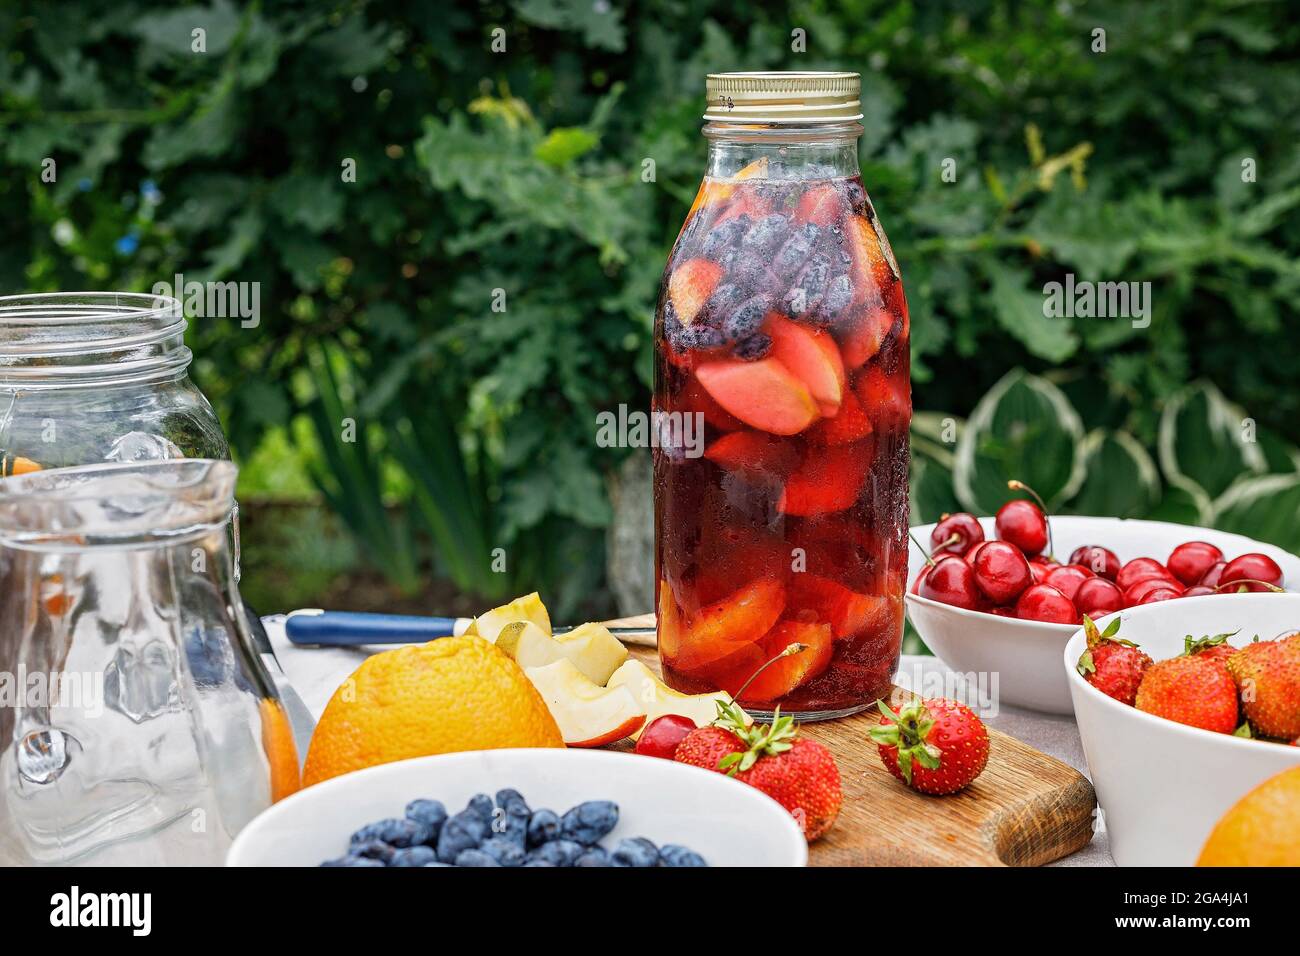 Punch made from organic fruits and berries. Refreshing alcohol-free summer drink with ice and fruit juice. Homemade drink in a glass bottle. Apples, s Stock Photo